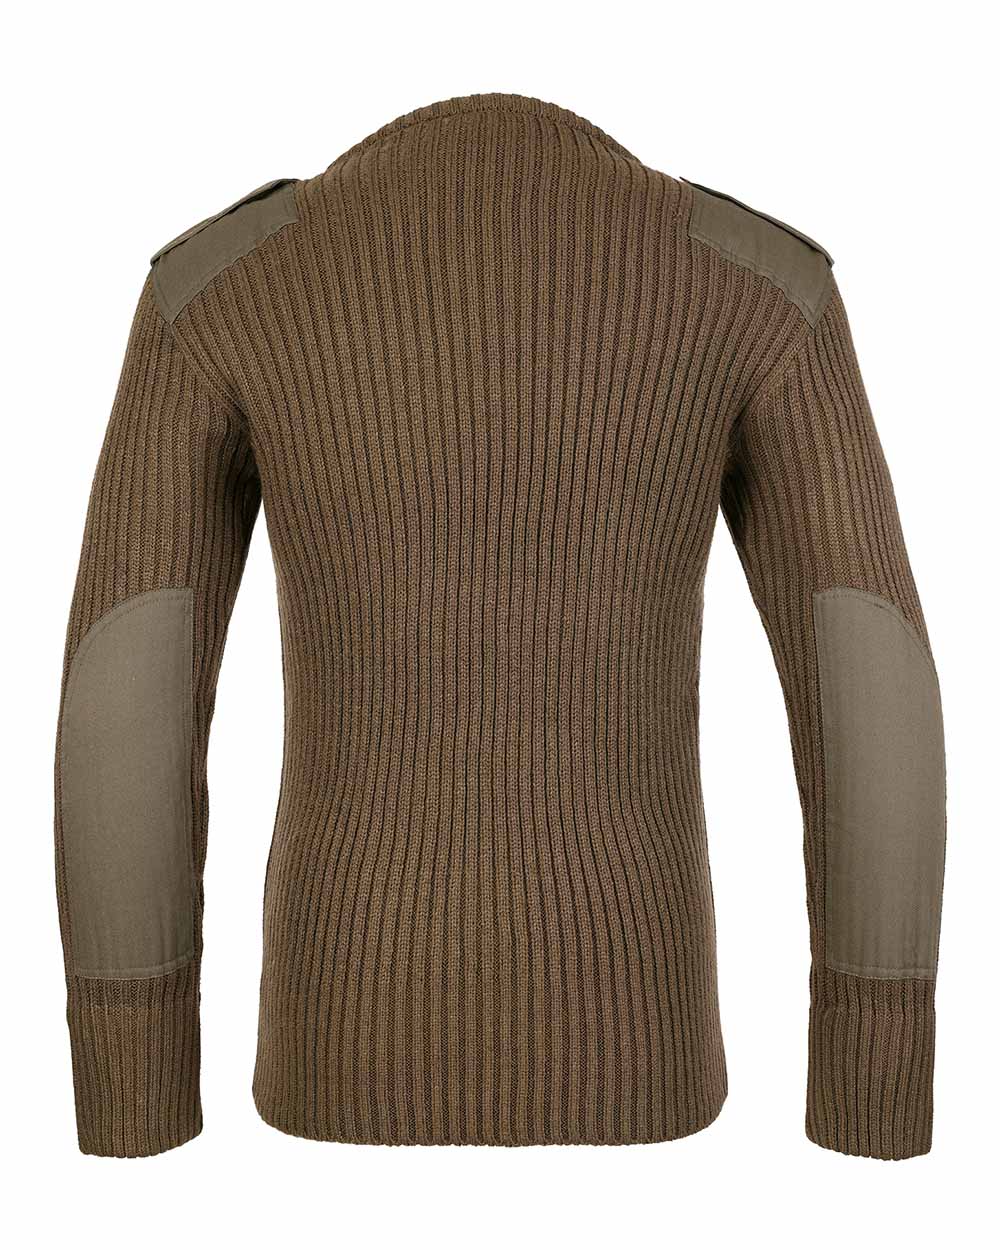 Back view Olive Crew Neck Military Style Jumper by Fort 